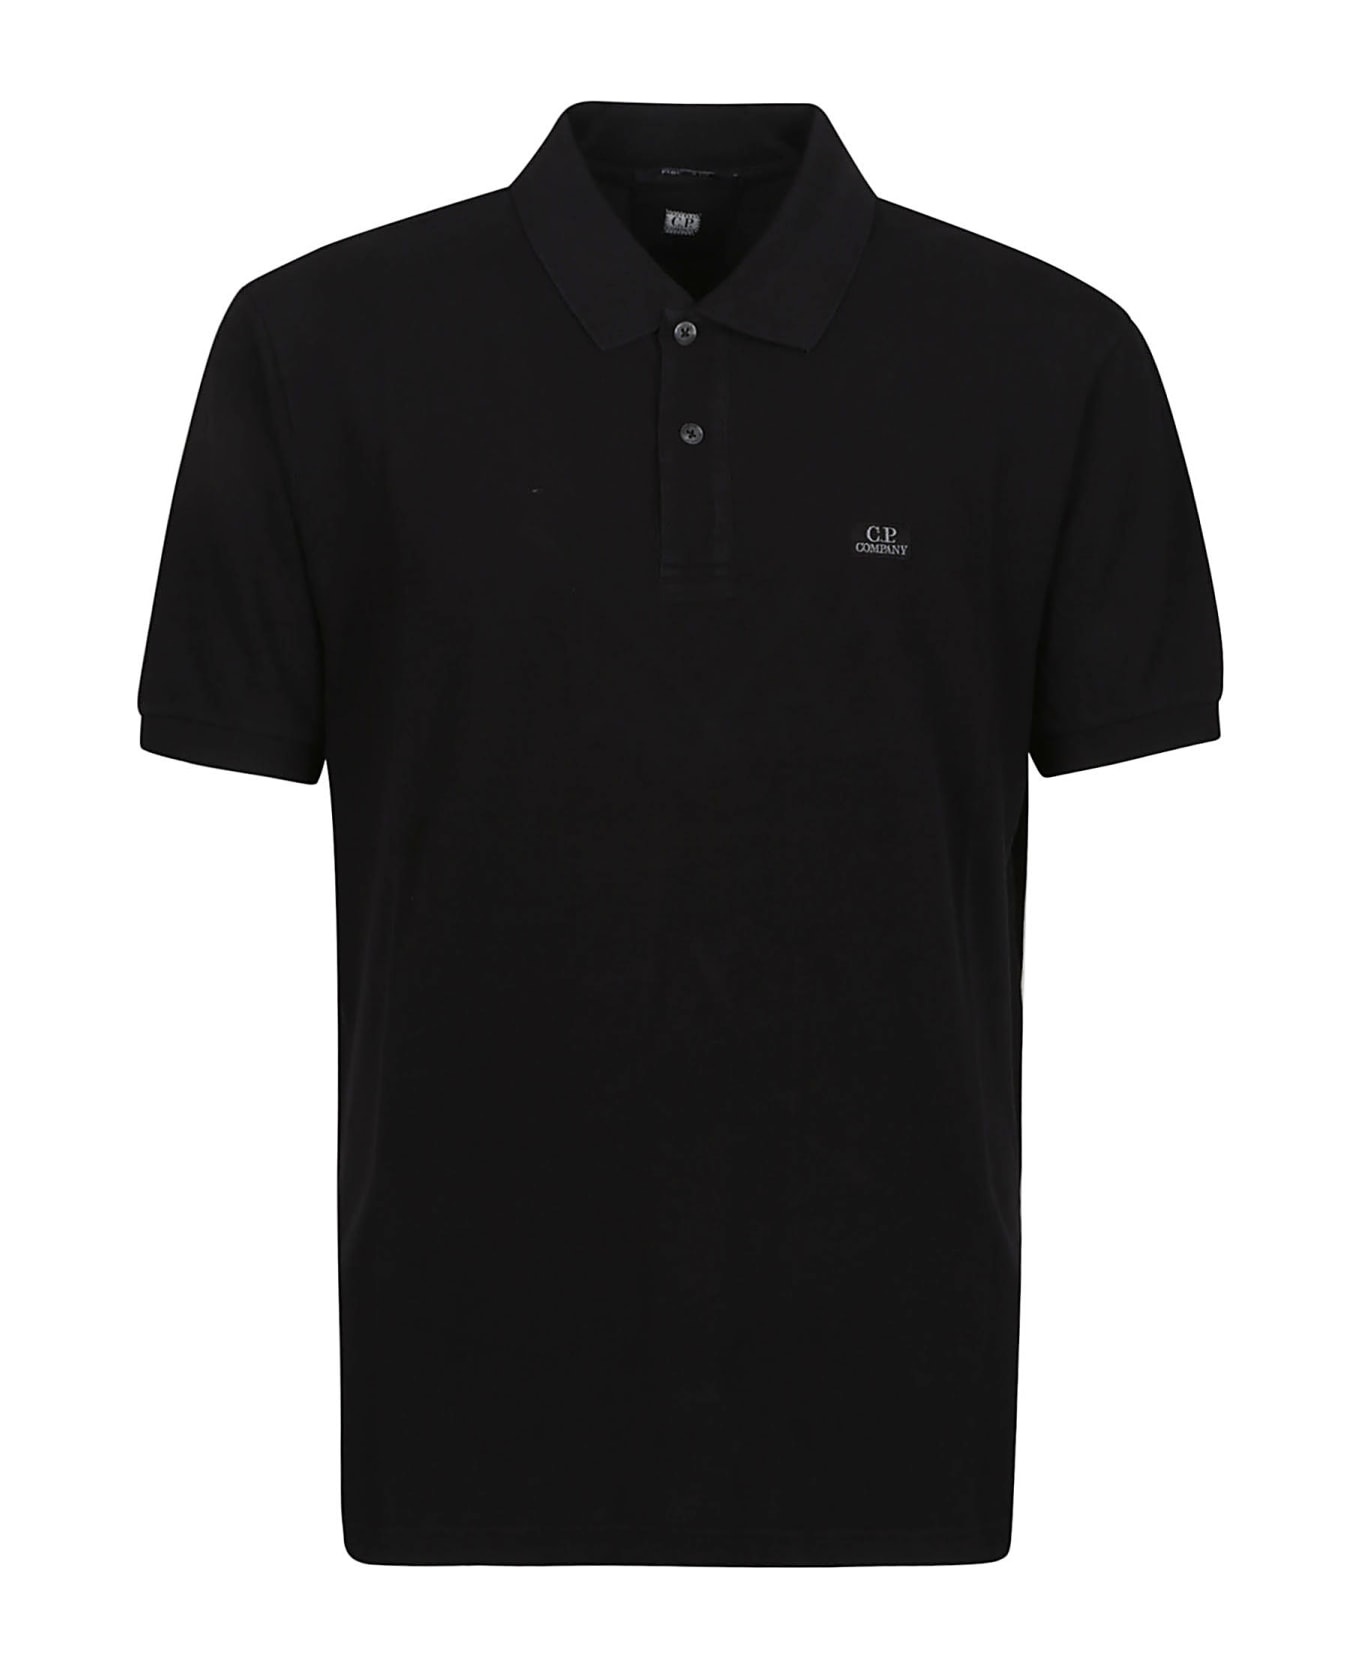 C.P. Company 24/1 Piquet Gament Dyed Short Sleeve Polo Shirt - Black ポロシャツ